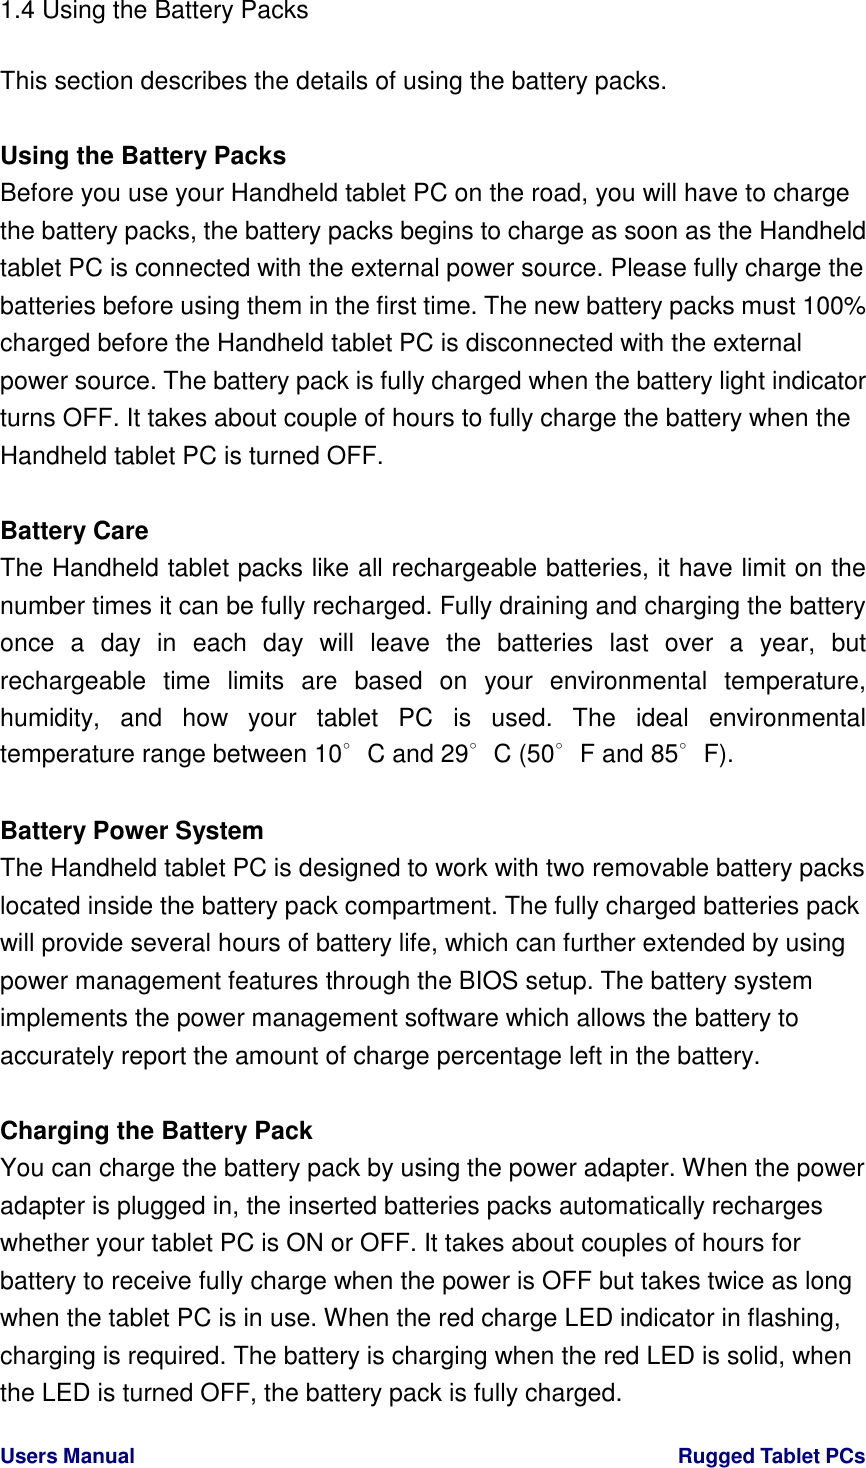 Users Manual                                                                                                        Rugged Tablet PCs  1.4 Using the Battery Packs  This section describes the details of using the battery packs.  Using the Battery Packs   Before you use your Handheld tablet PC on the road, you will have to charge the battery packs, the battery packs begins to charge as soon as the Handheld   tablet PC is connected with the external power source. Please fully charge the batteries before using them in the first time. The new battery packs must 100% charged before the Handheld tablet PC is disconnected with the external power source. The battery pack is fully charged when the battery light indicator turns OFF. It takes about couple of hours to fully charge the battery when the Handheld tablet PC is turned OFF.    Battery Care The Handheld tablet packs like all rechargeable batteries, it have limit on the number times it can be fully recharged. Fully draining and charging the battery once  a  day  in  each  day  will  leave  the  batteries  last  over  a  year,  but rechargeable  time  limits  are  based  on  your  environmental  temperature, humidity,  and  how  your  tablet  PC  is  used.  The  ideal  environmental temperature range between 10∘C and 29 C∘ (50 F and 85 F)∘ ∘ .    Battery Power System The Handheld tablet PC is designed to work with two removable battery packs located inside the battery pack compartment. The fully charged batteries pack will provide several hours of battery life, which can further extended by using power management features through the BIOS setup. The battery system implements the power management software which allows the battery to accurately report the amount of charge percentage left in the battery.    Charging the Battery Pack   You can charge the battery pack by using the power adapter. When the power adapter is plugged in, the inserted batteries packs automatically recharges whether your tablet PC is ON or OFF. It takes about couples of hours for battery to receive fully charge when the power is OFF but takes twice as long when the tablet PC is in use. When the red charge LED indicator in flashing, charging is required. The battery is charging when the red LED is solid, when the LED is turned OFF, the battery pack is fully charged.     